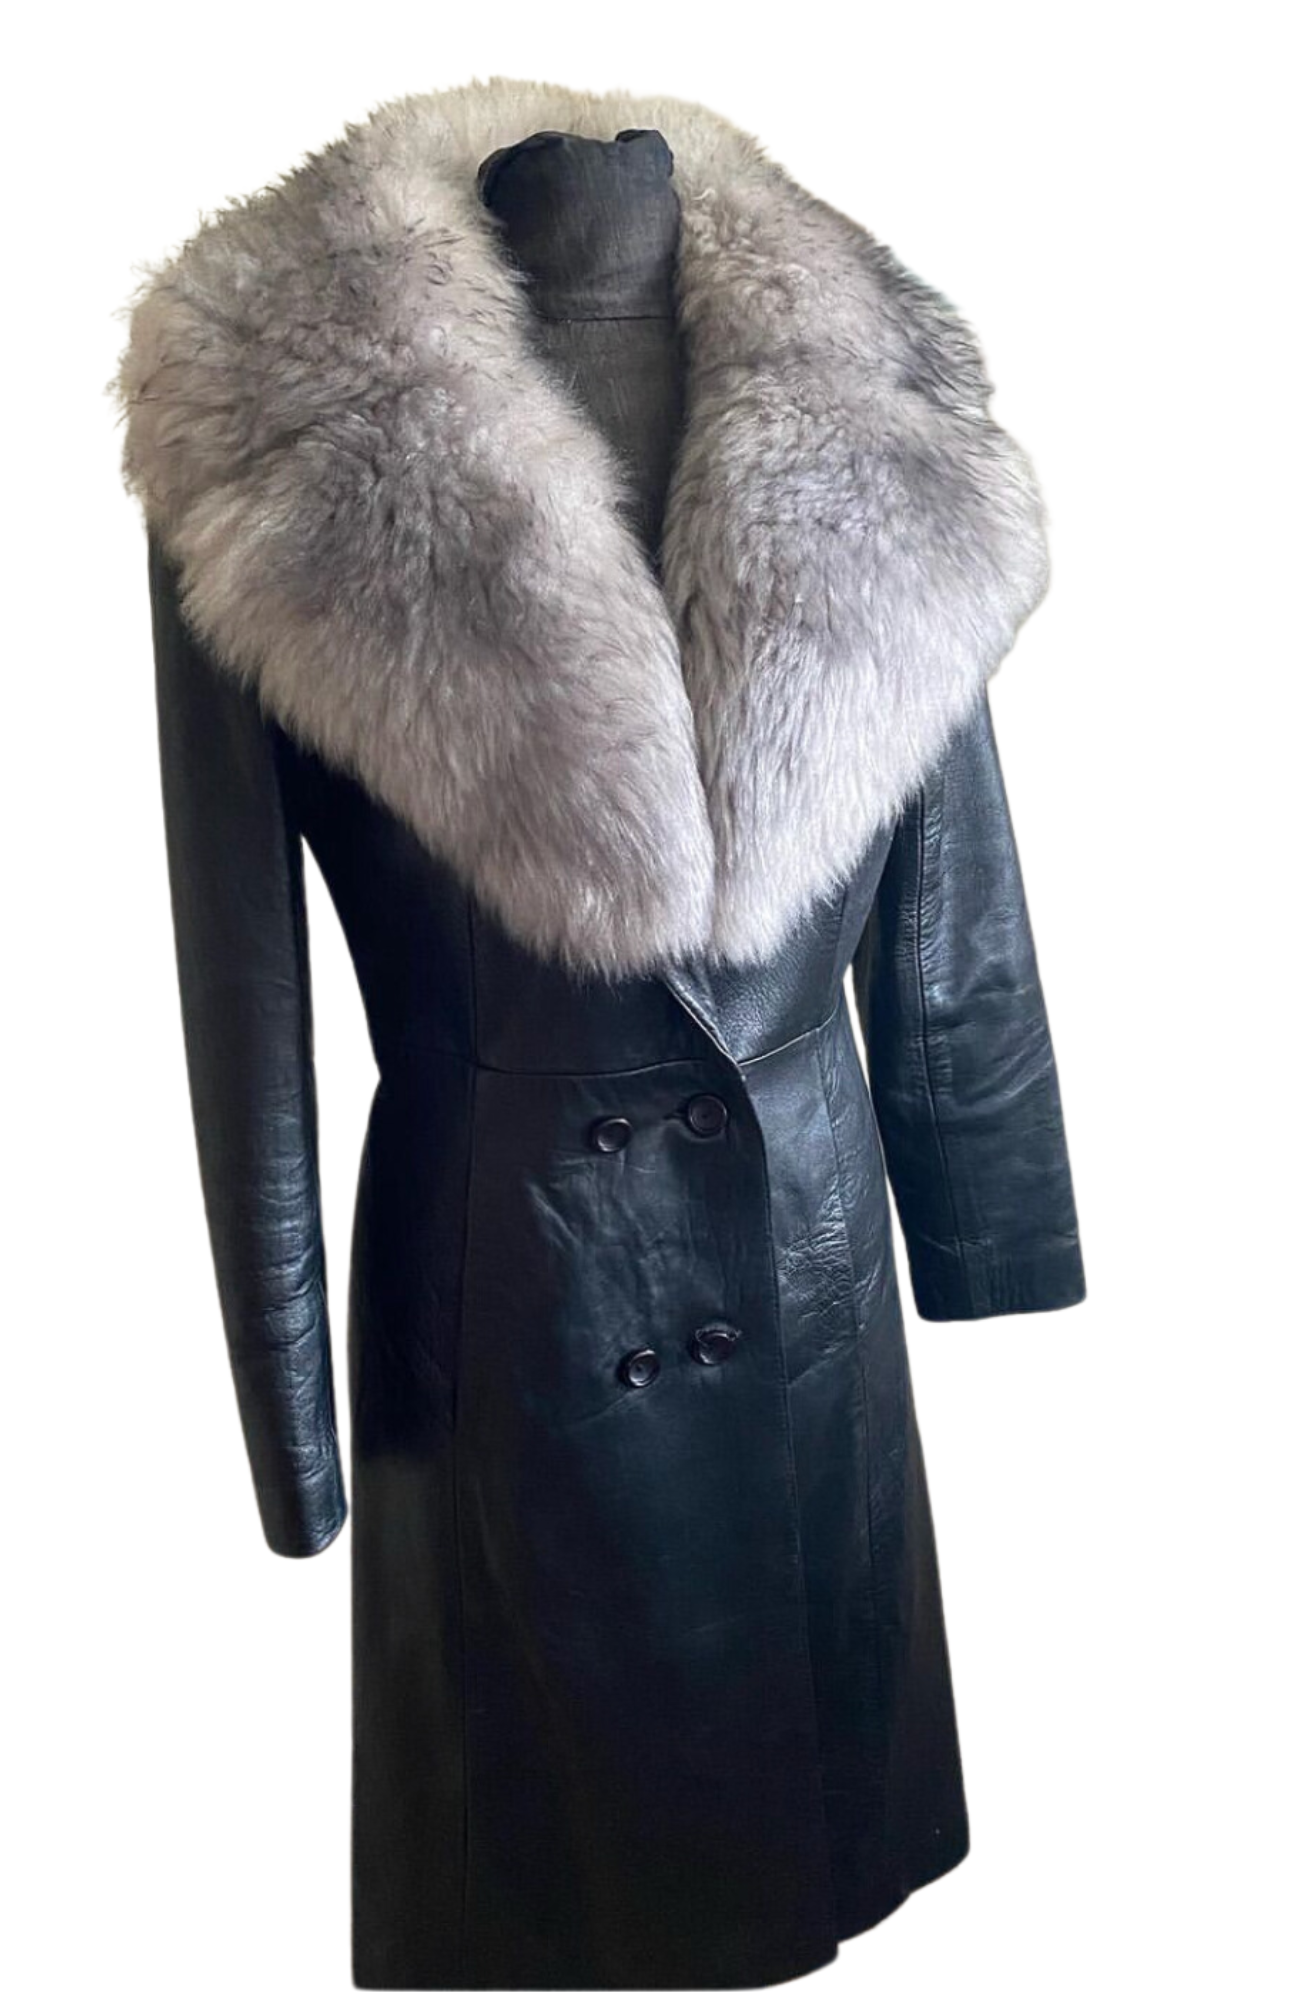 Vintage Leather Coat with Sheepskin collar - Rock the Jumpsuit